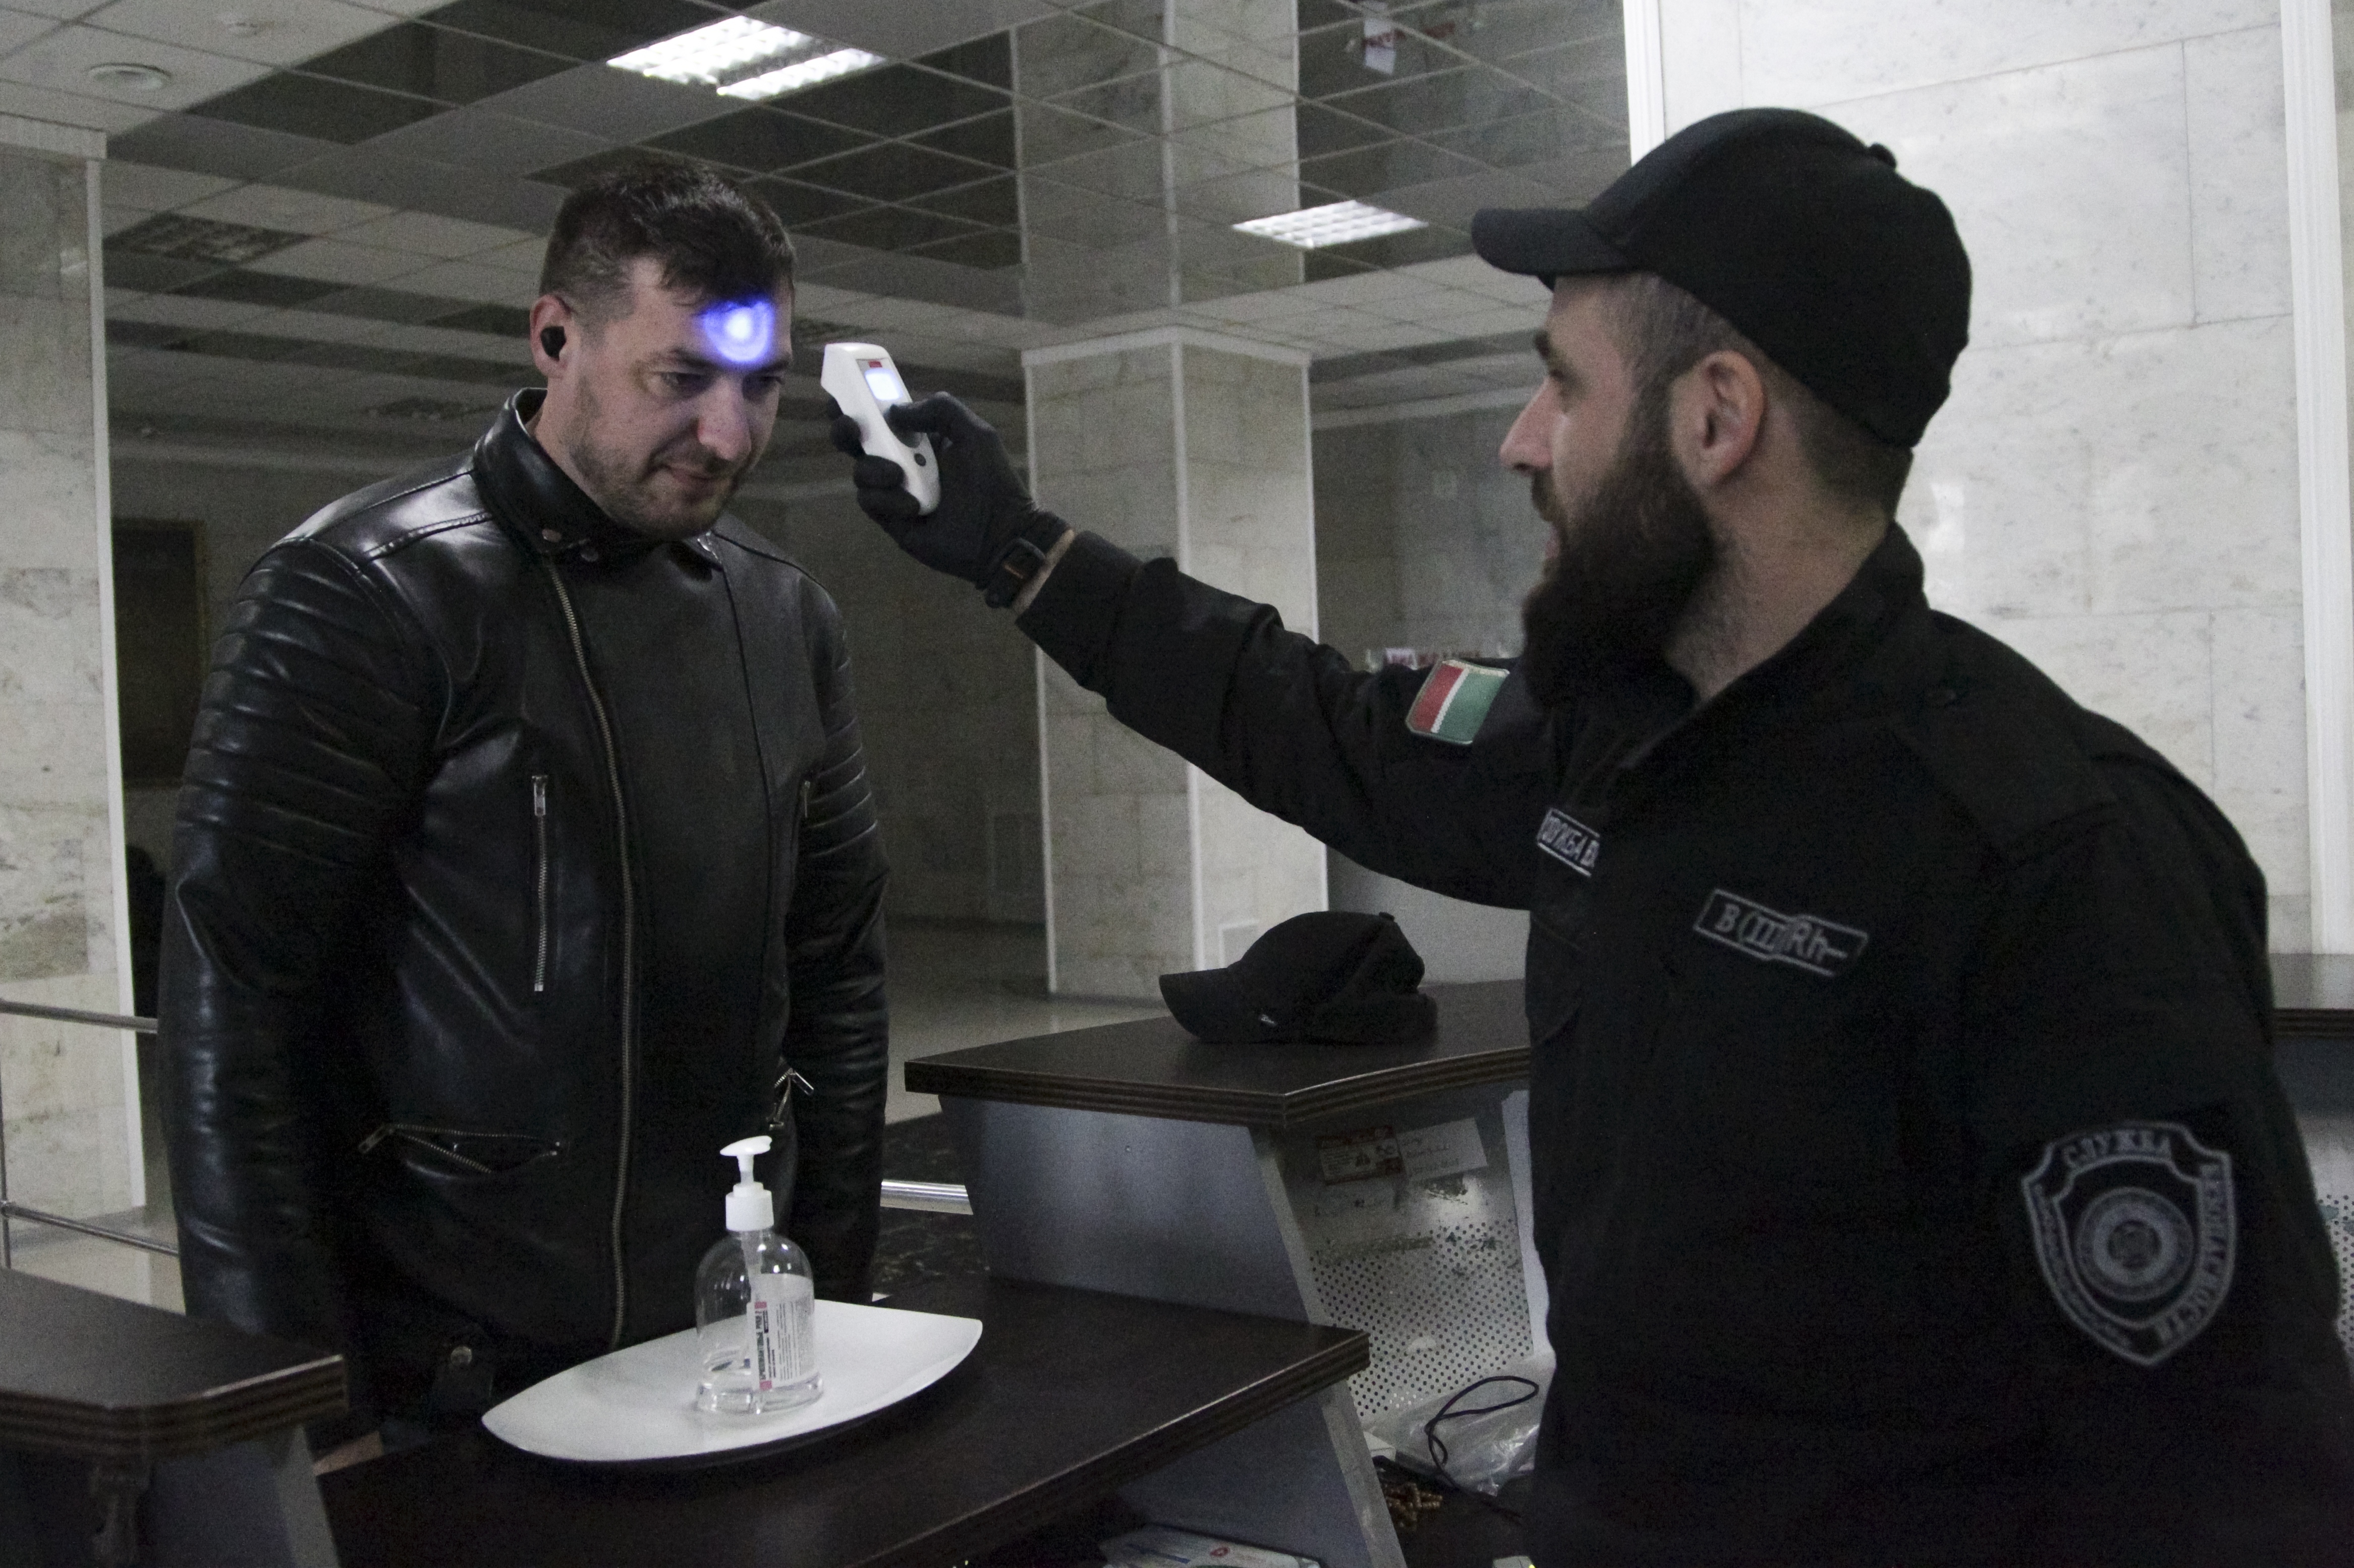 An security checks the body temperature of a man at an entrance of a building in Chechen provide capital Grozny, Russia.